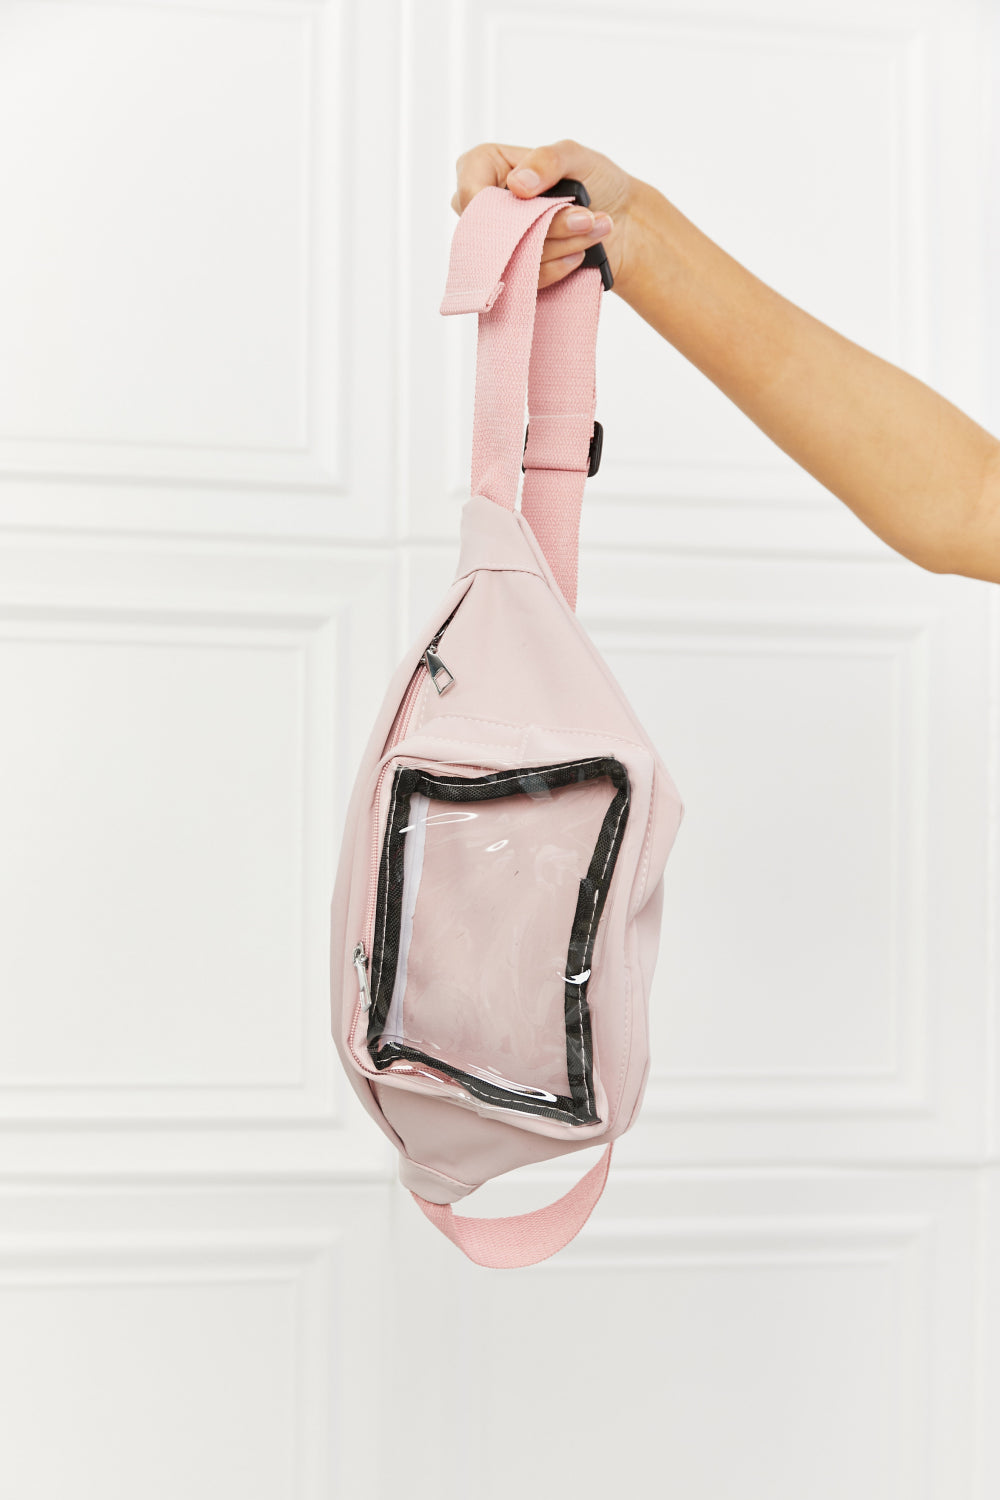 Fame Doing Me Waist Bag in Pink - BEAUTY COSMOTICS SHOP